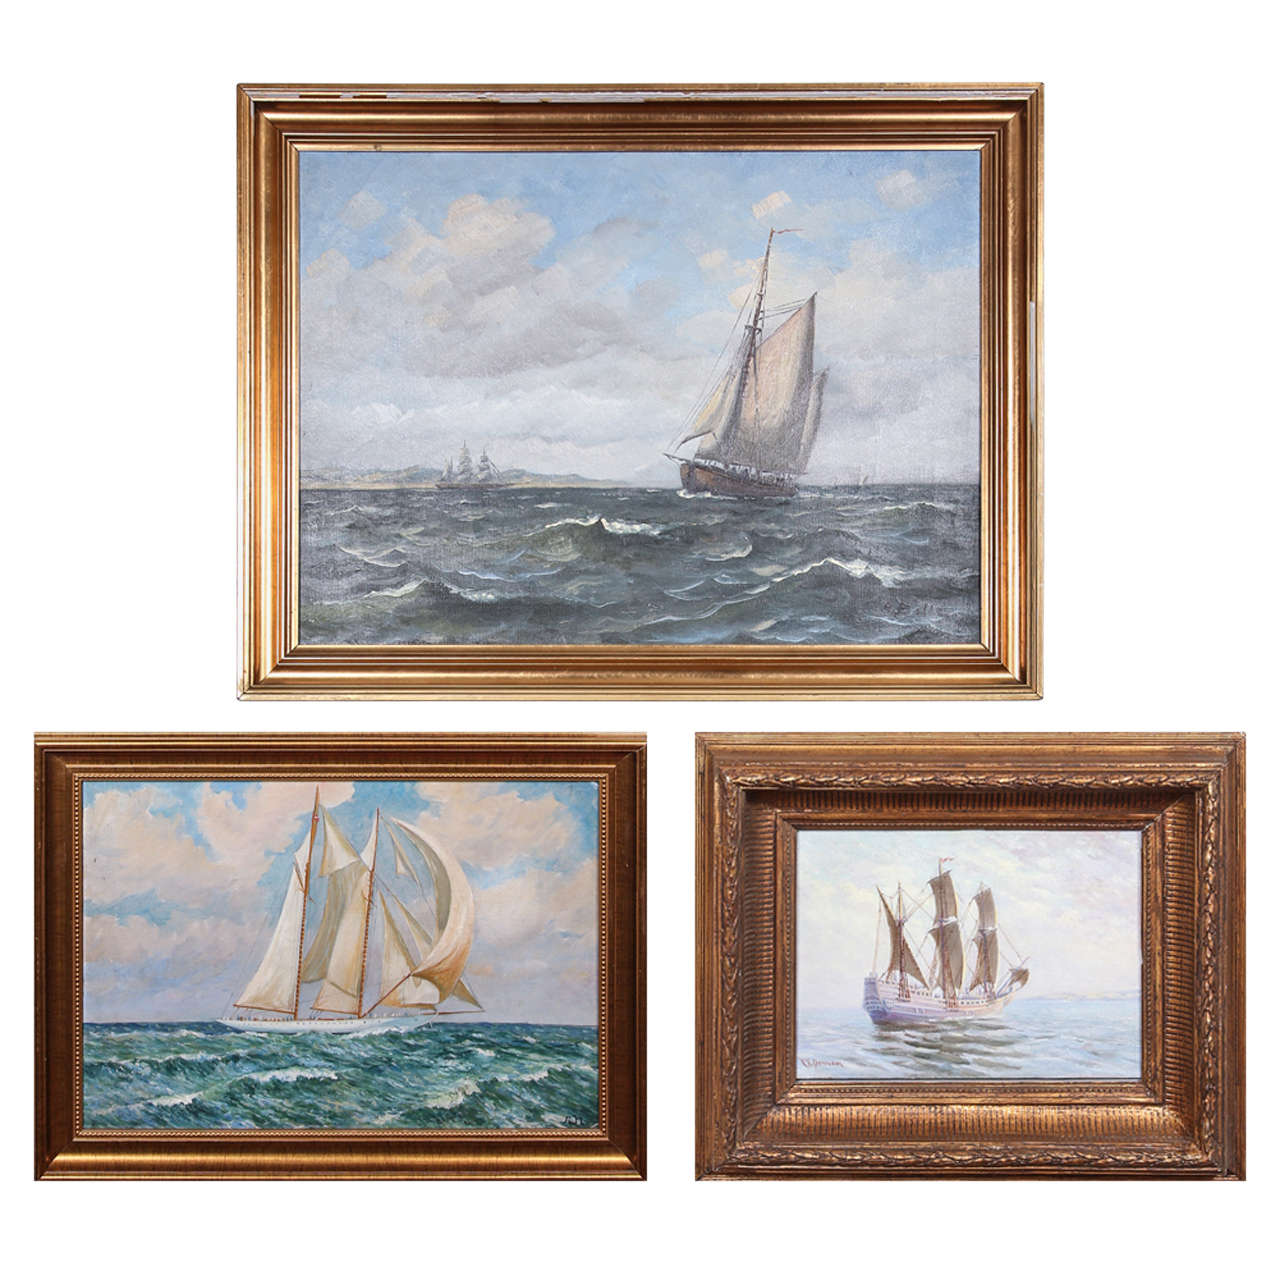 Vintage Sail Boat Paintings For Sale